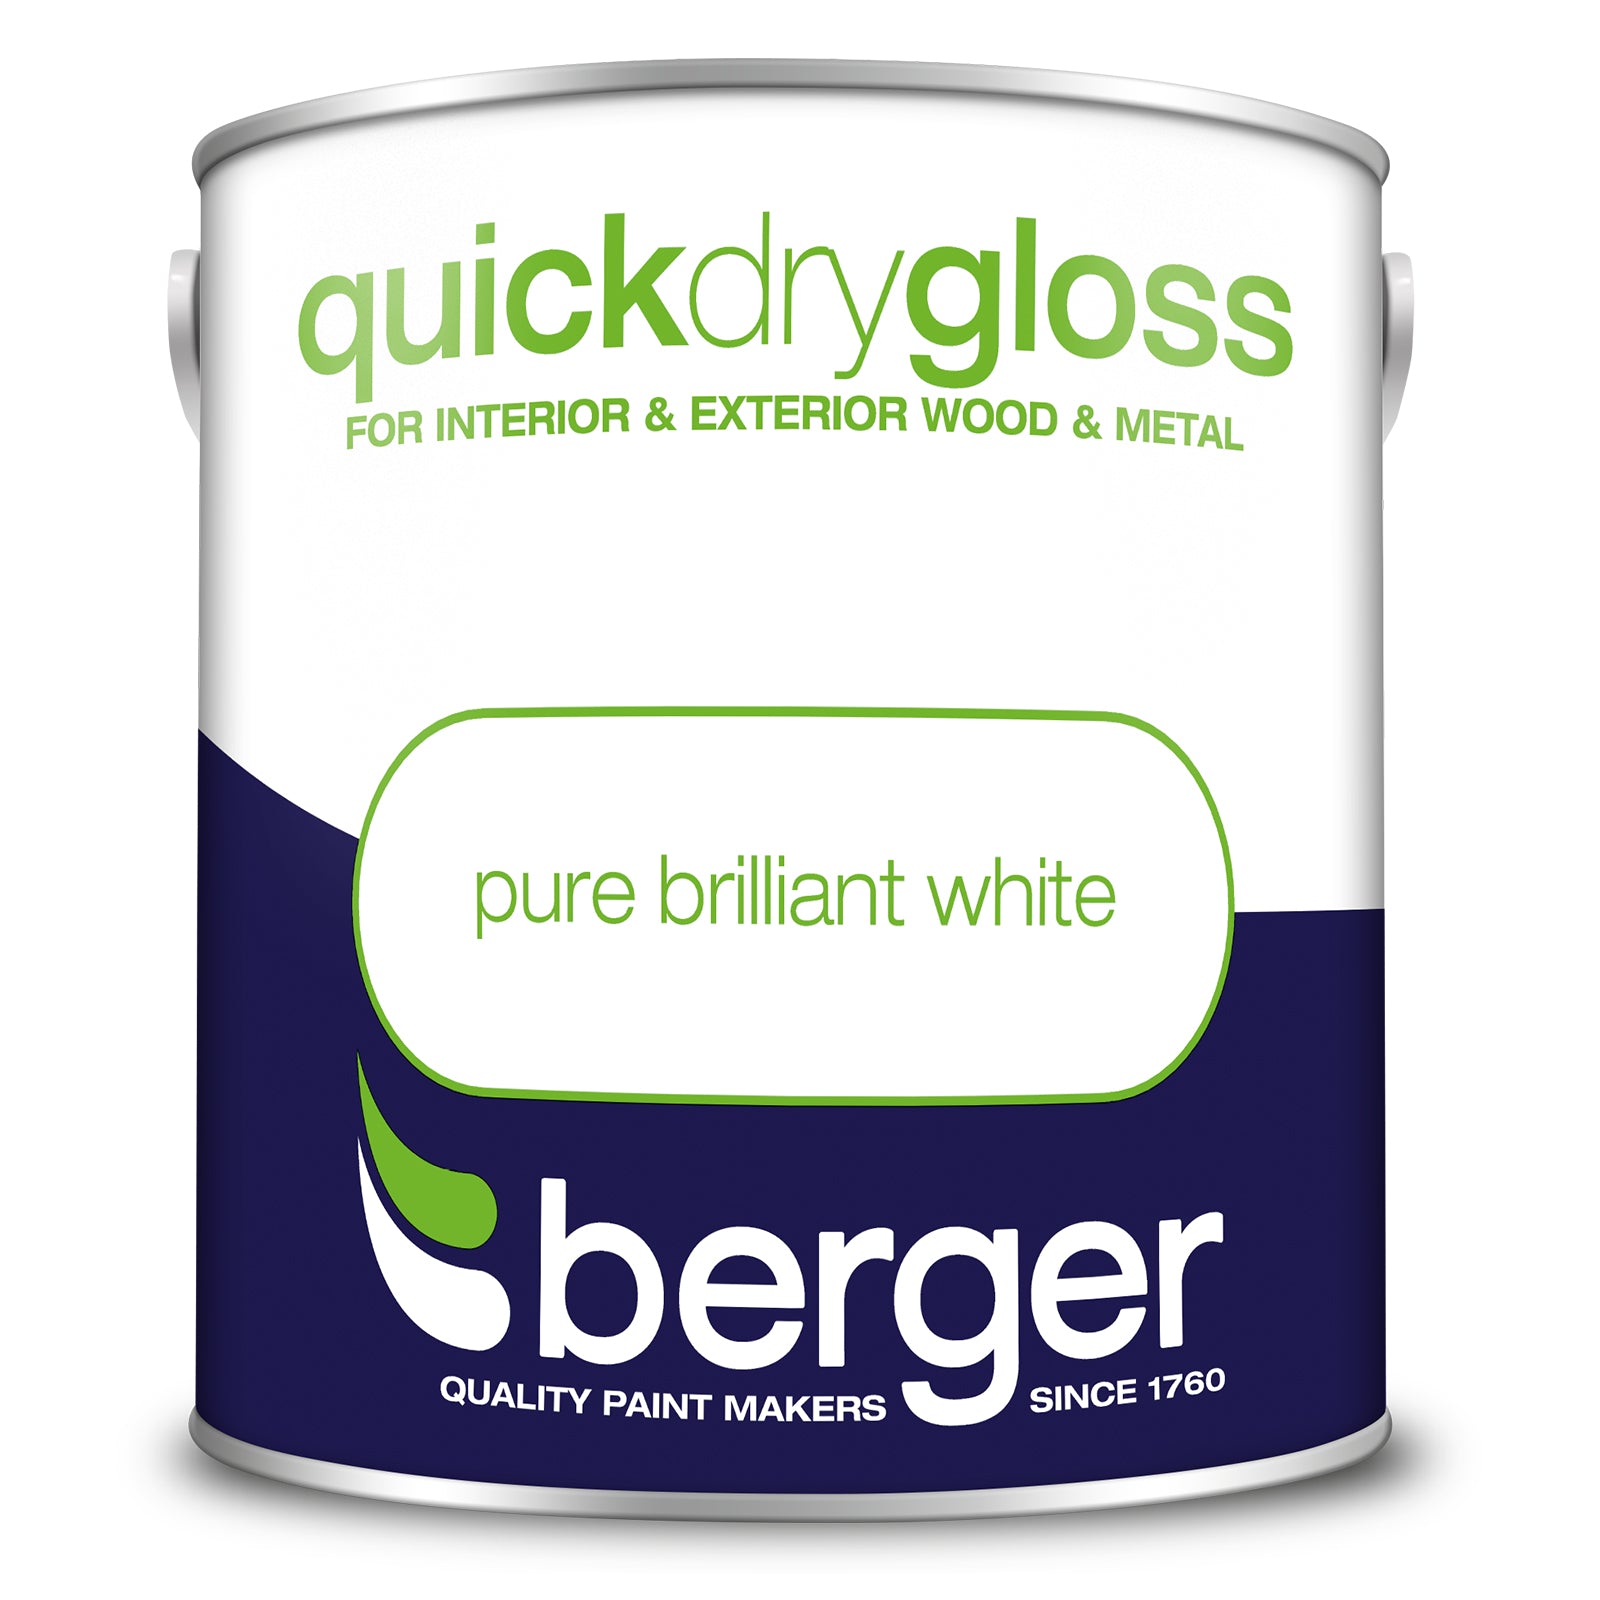 Berger Quick Drying Gloss Pure Brilliant White 2.5L